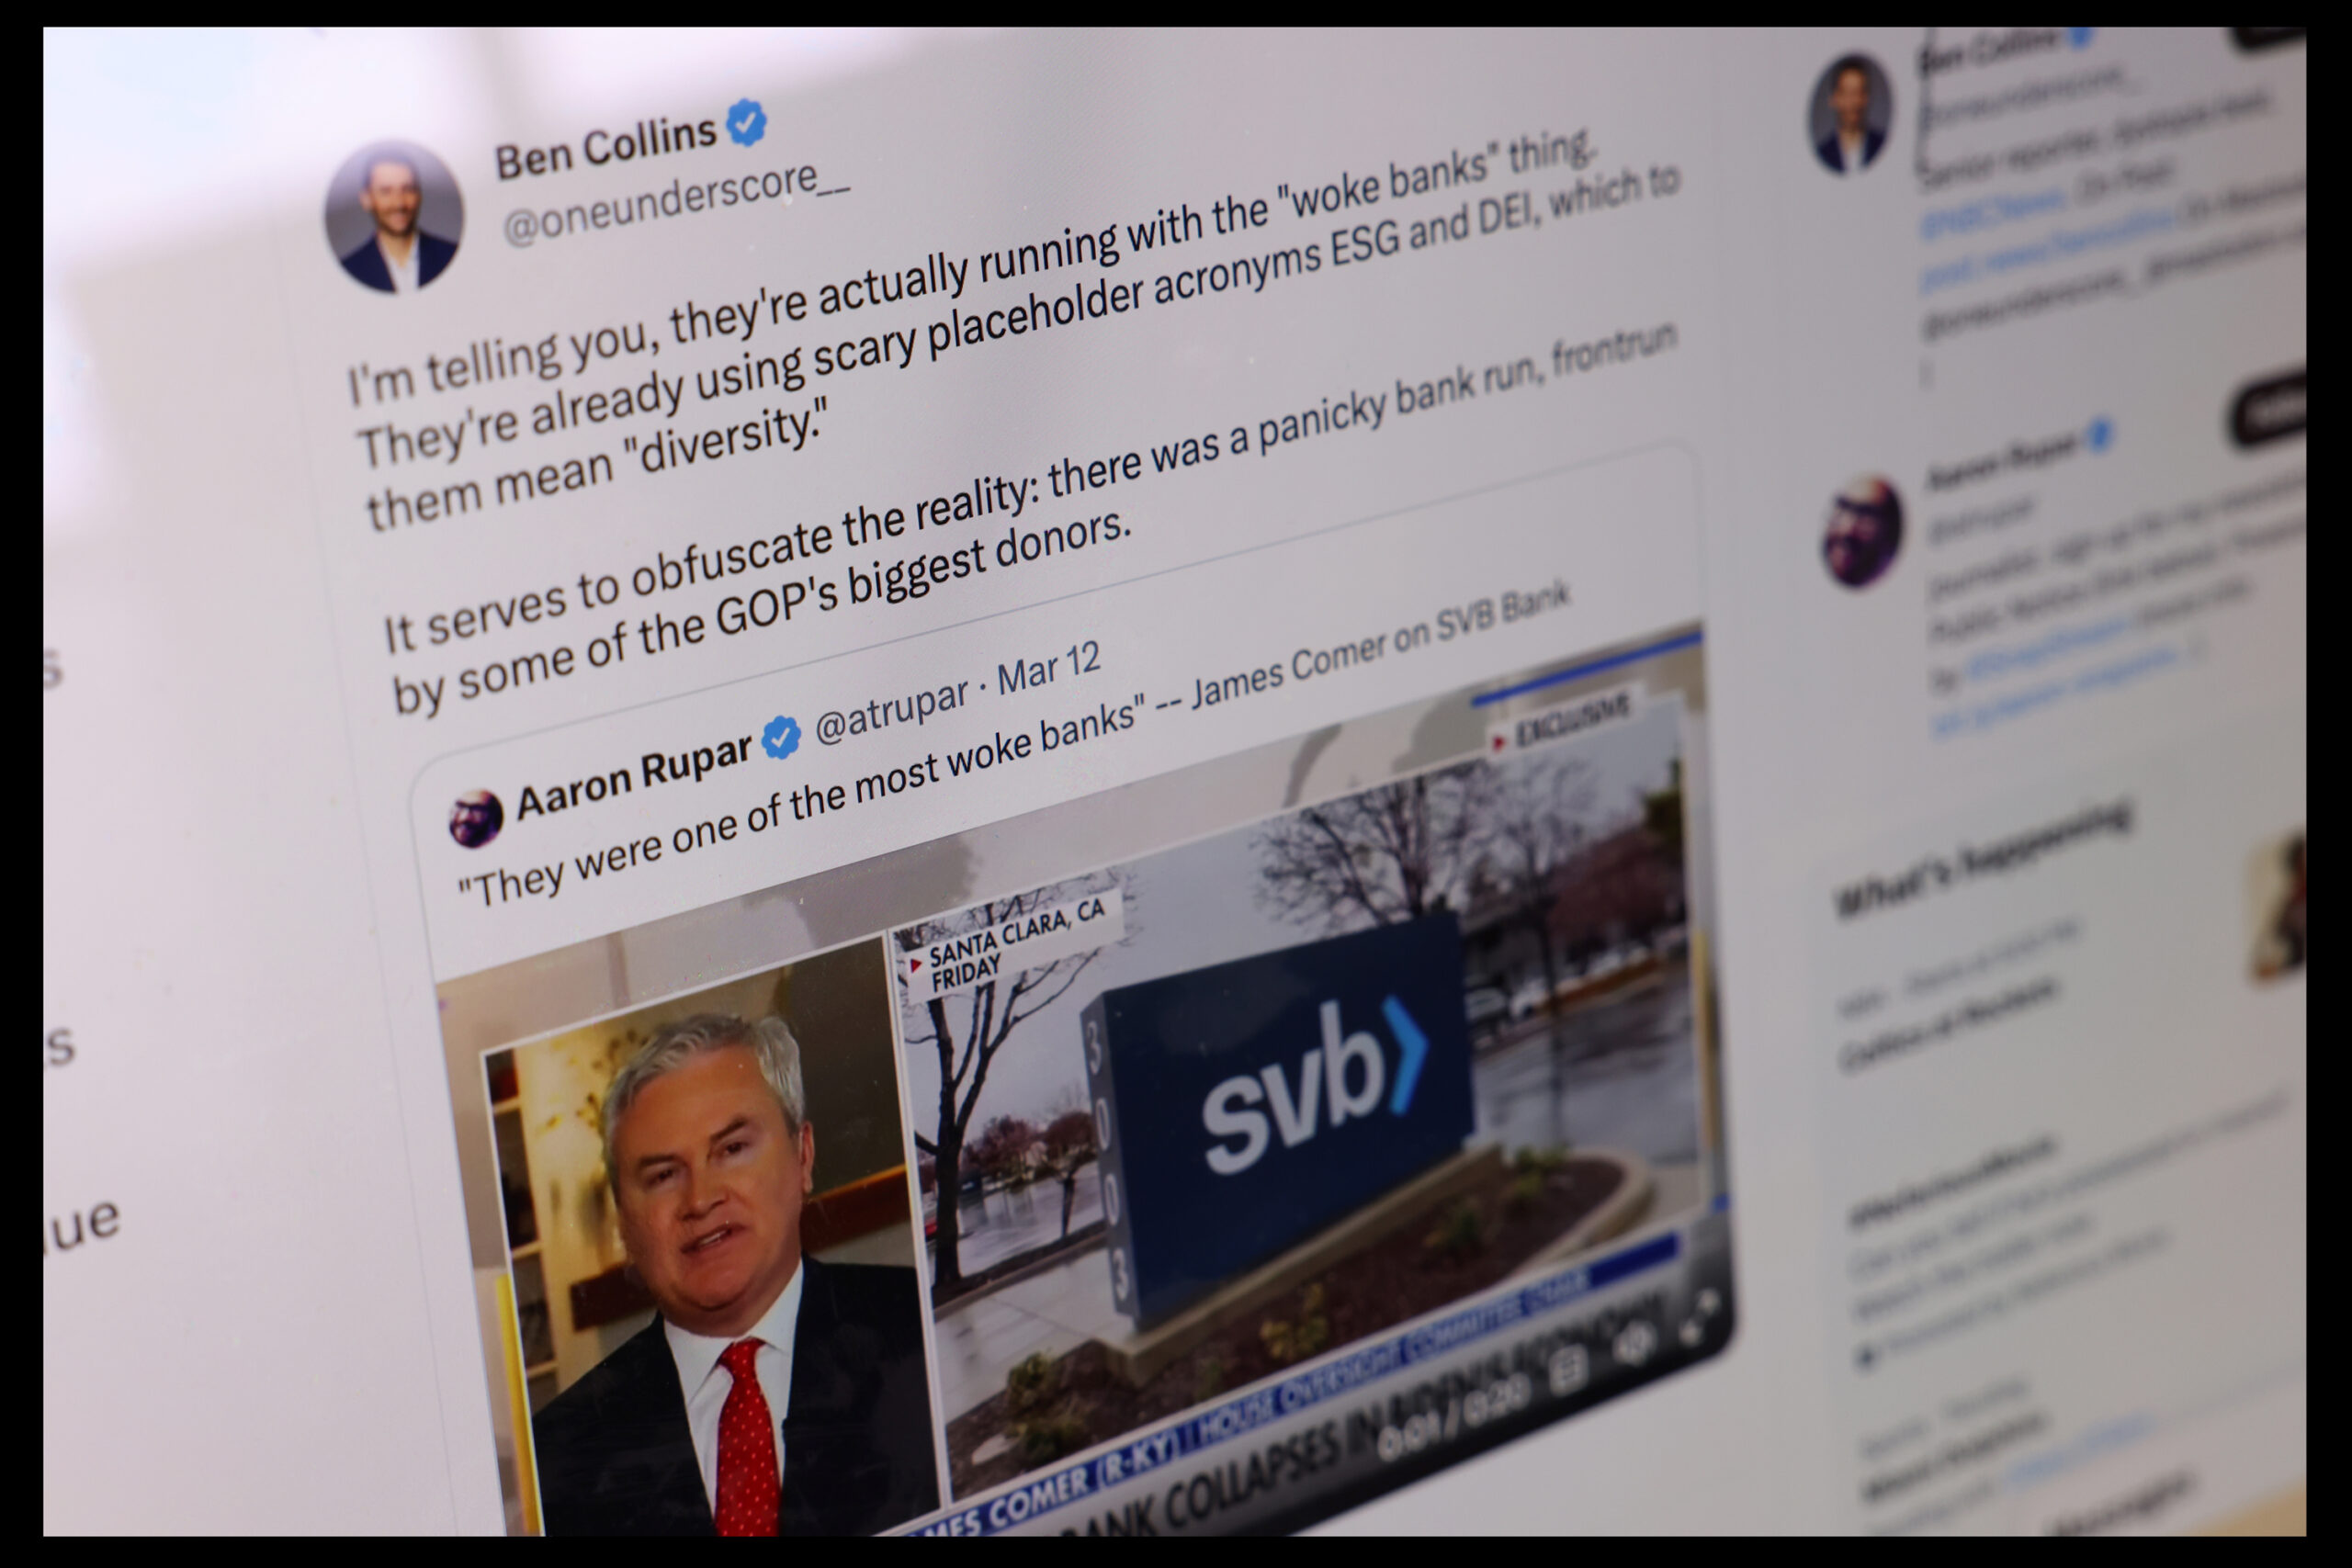 SVB collapse: Twitter rages over claims wokeness killed bank